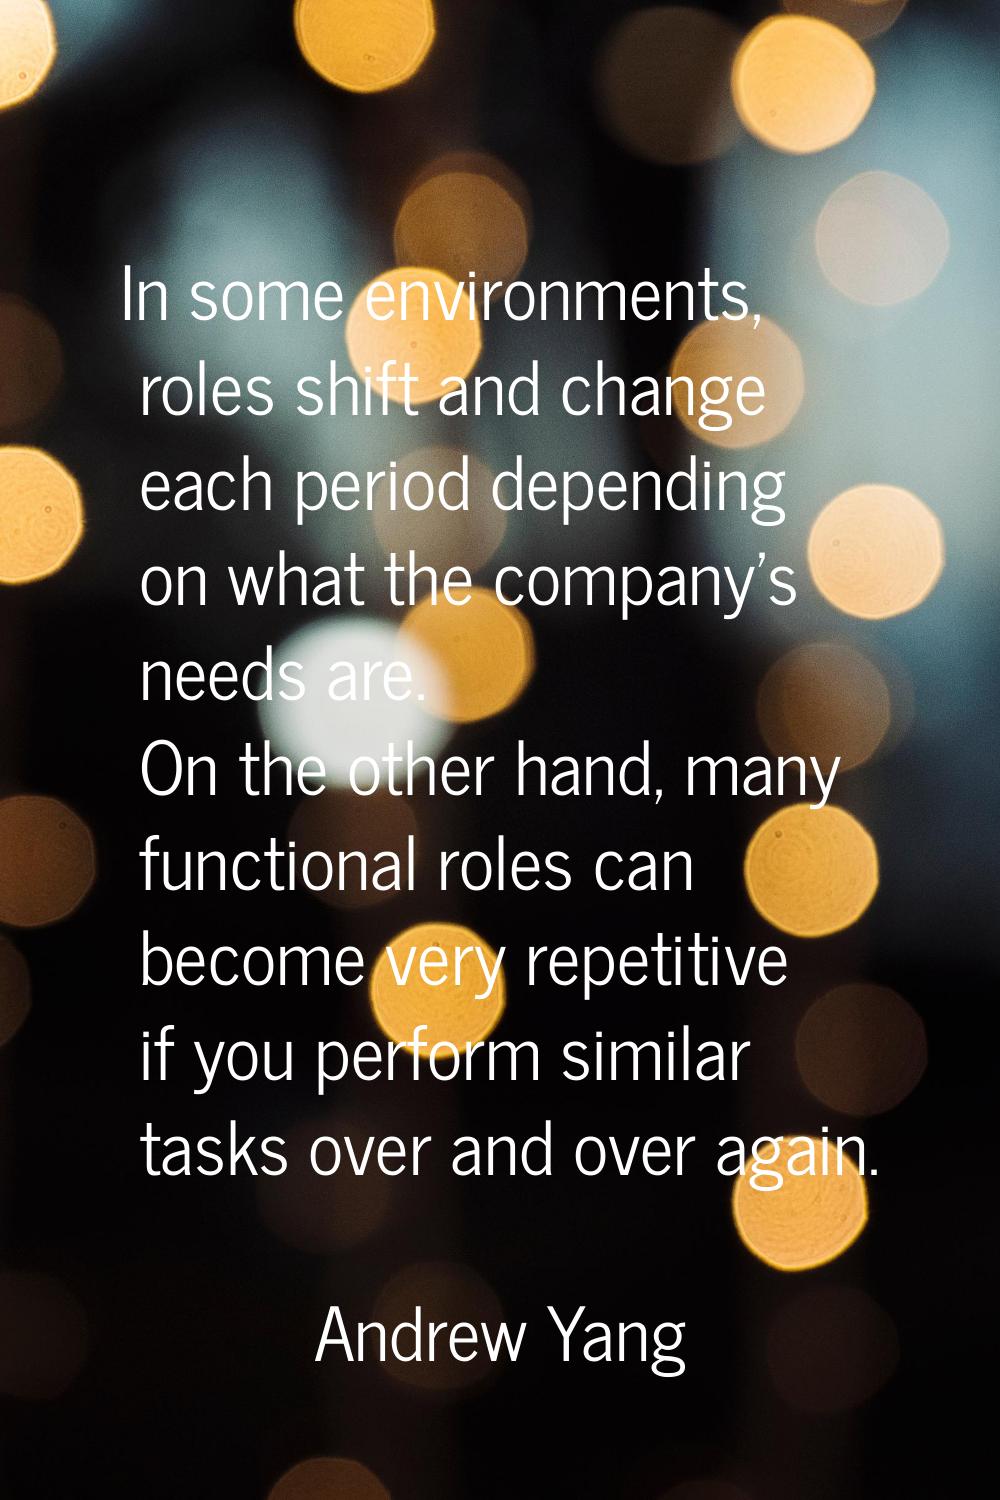 In some environments, roles shift and change each period depending on what the company's needs are.